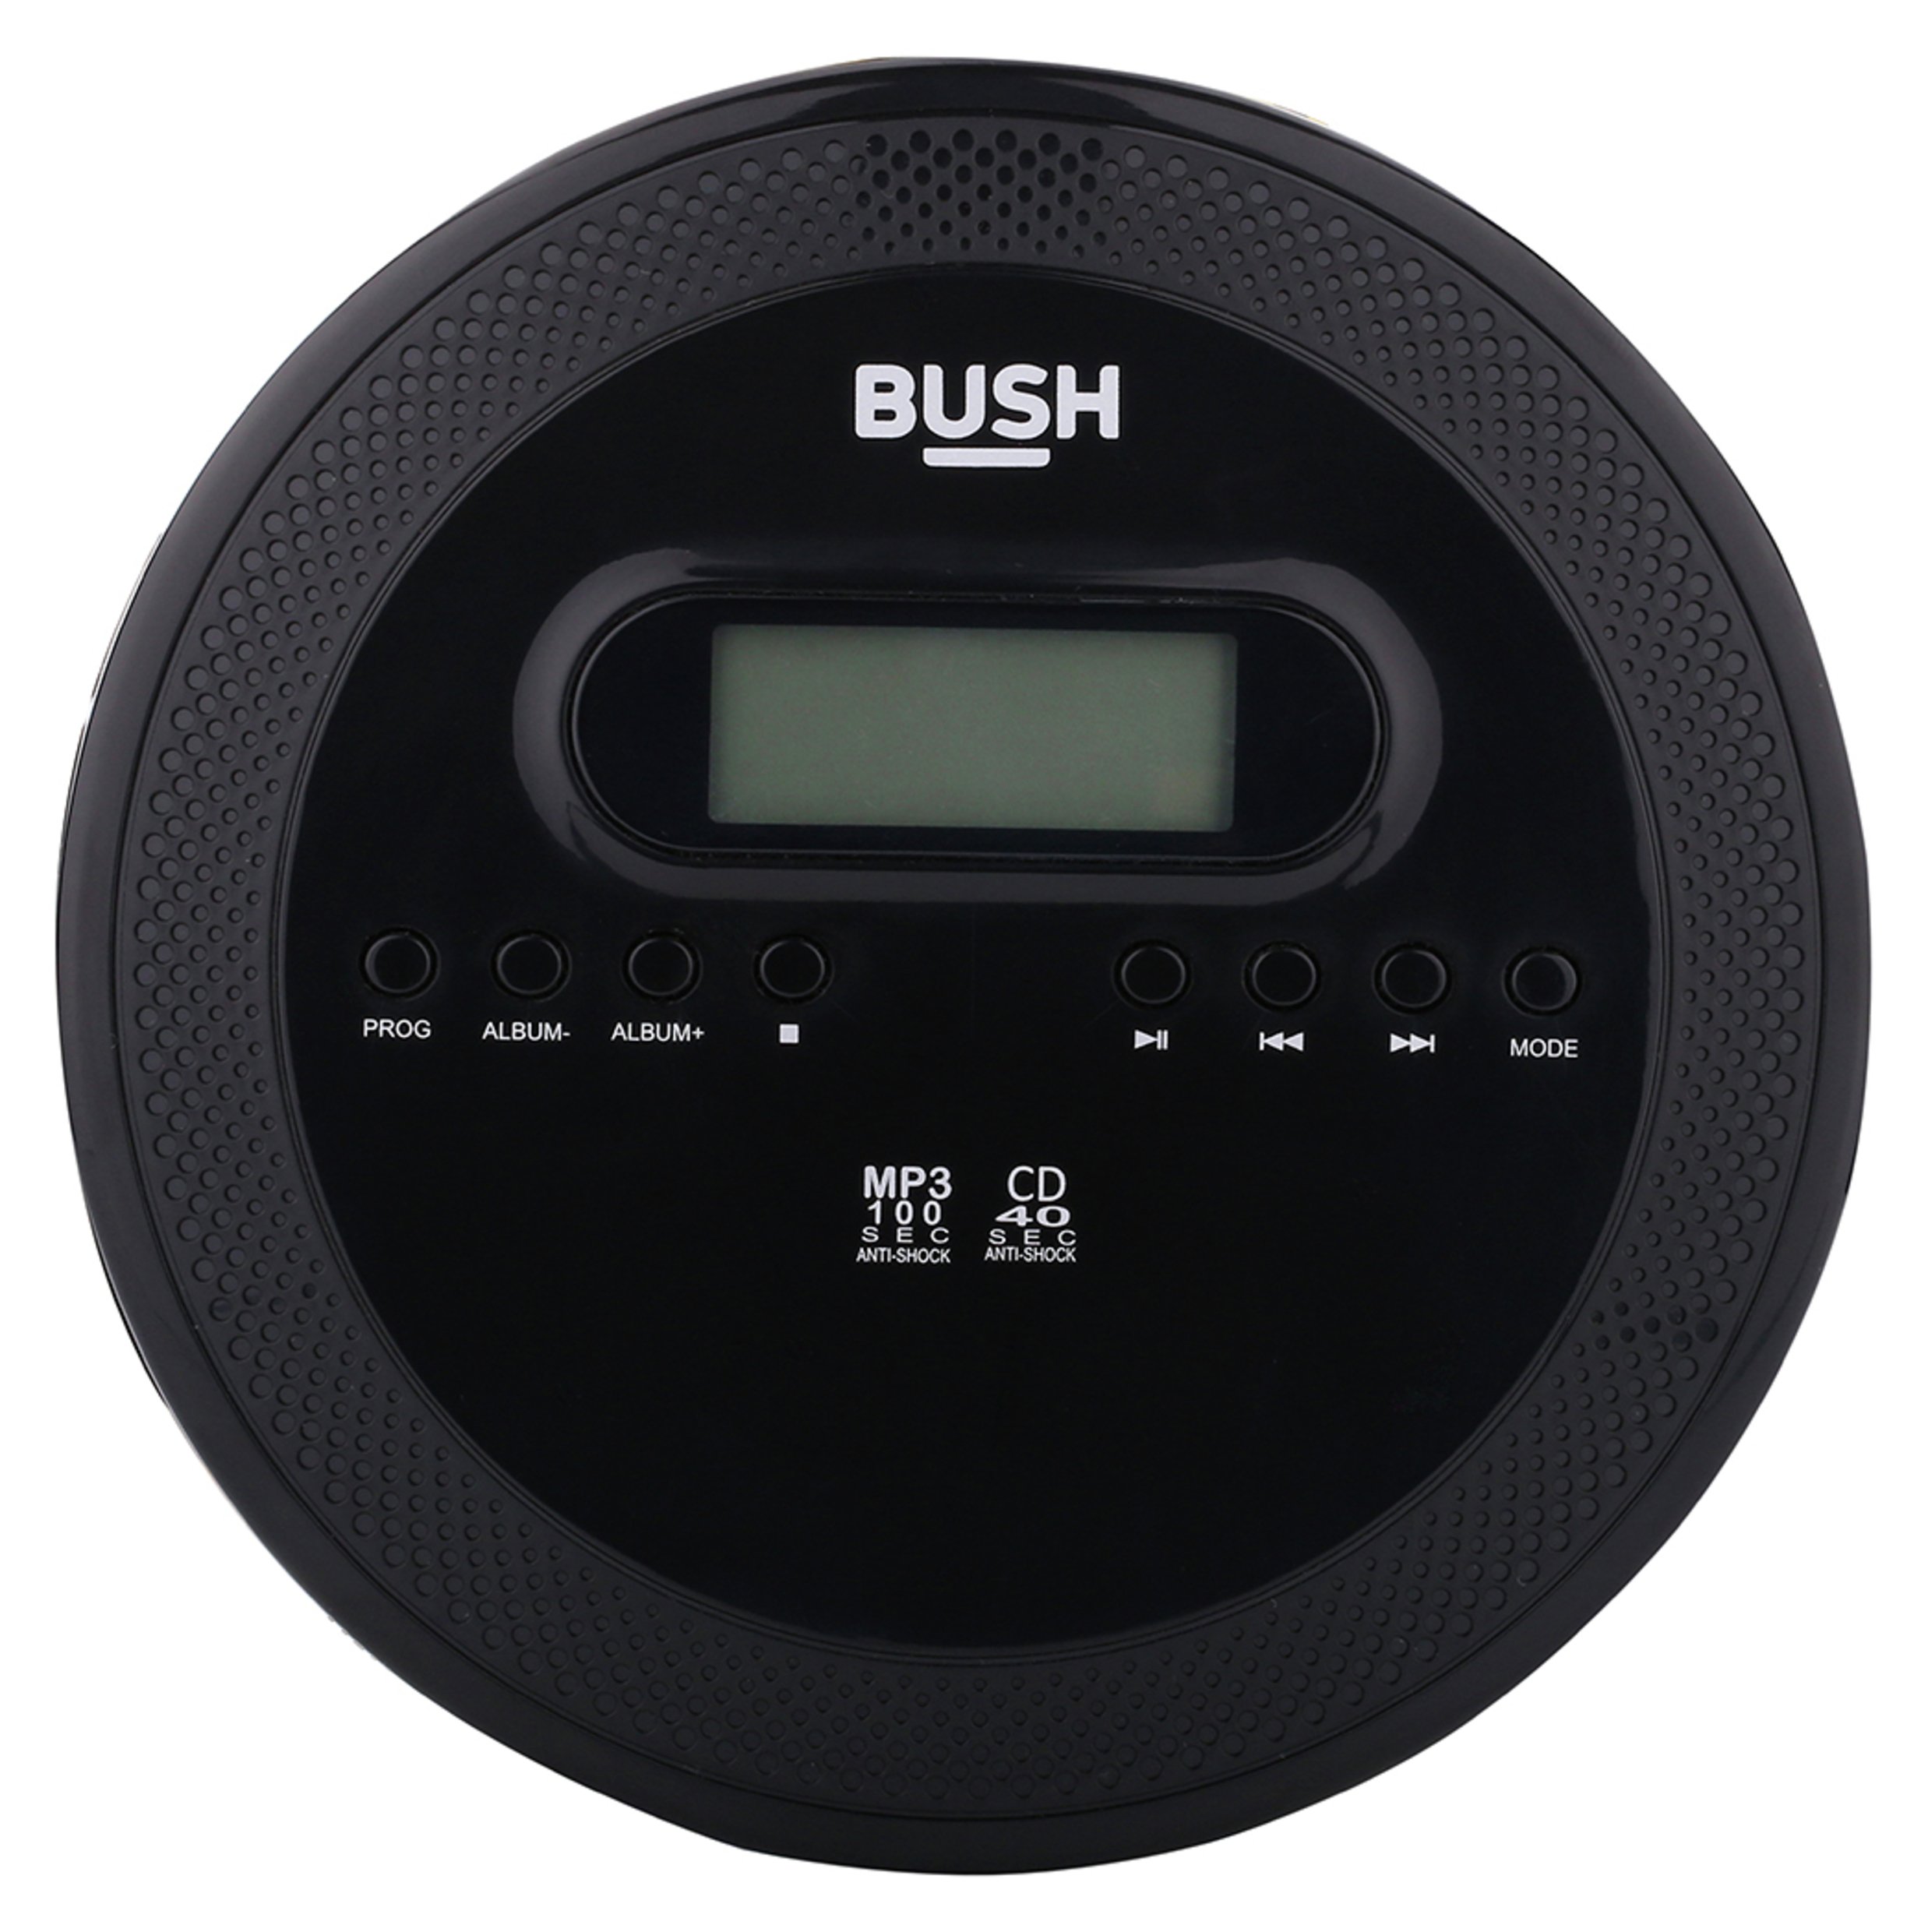 Bush - CD Player with MP3 Playback Review